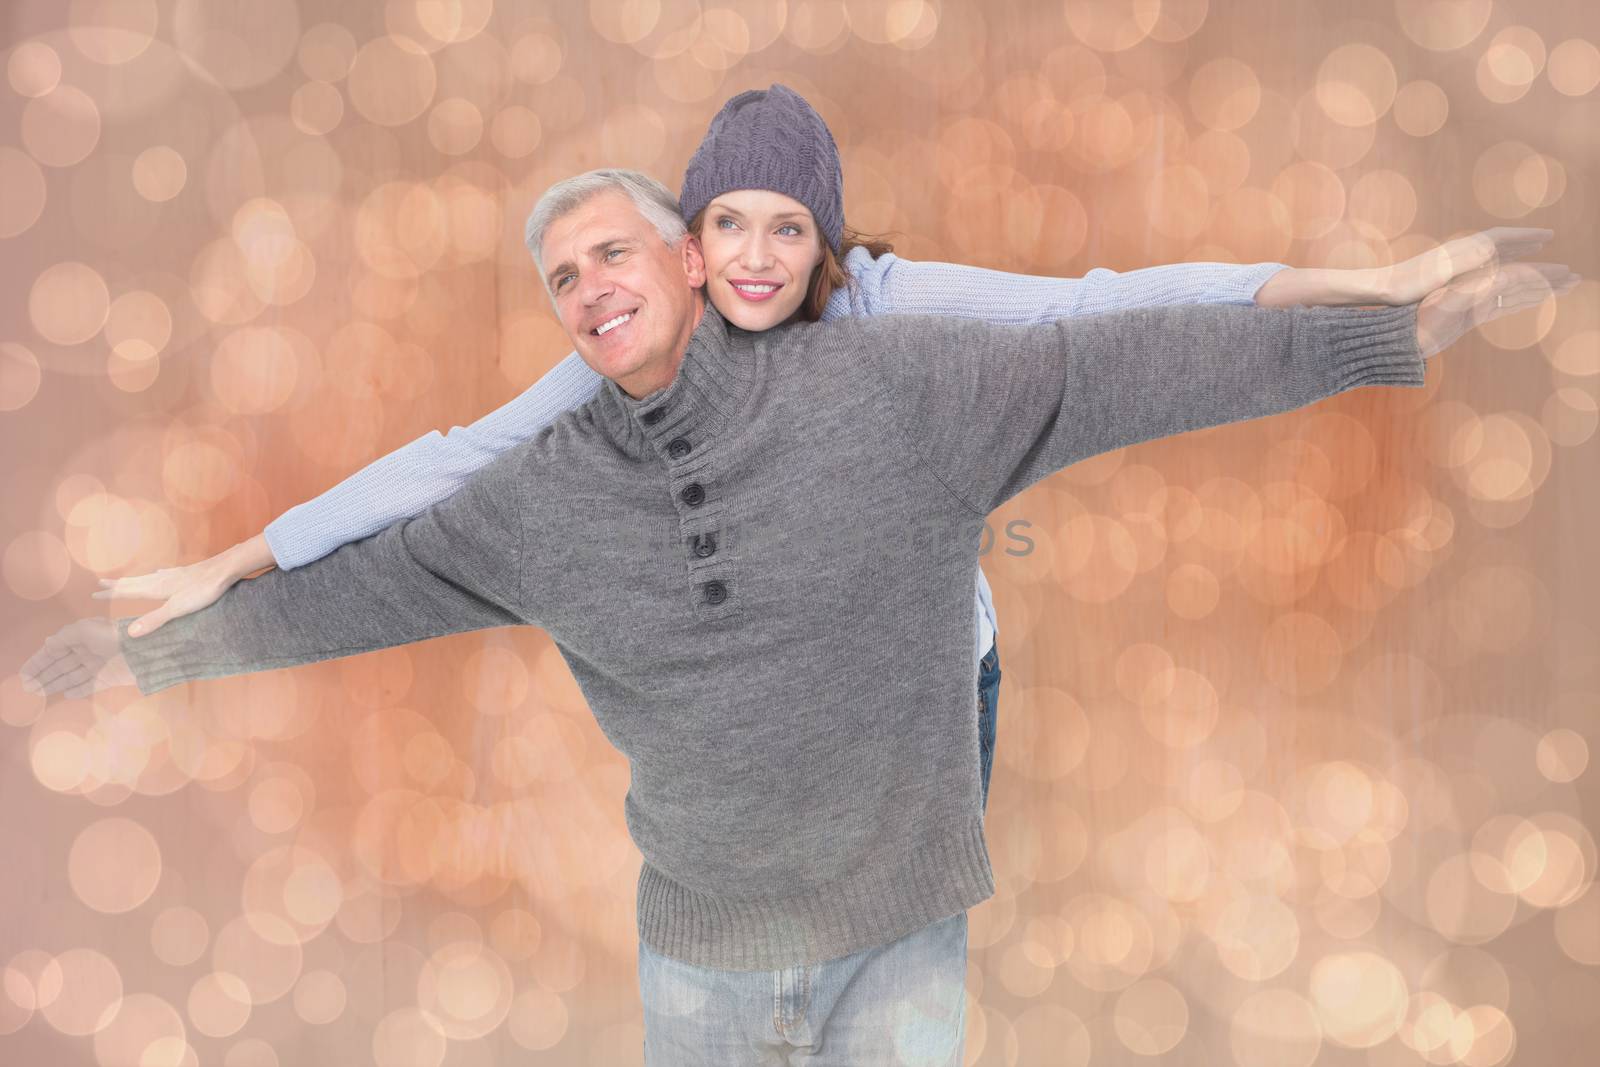 Carefree couple in warm clothing against light glowing dots design pattern